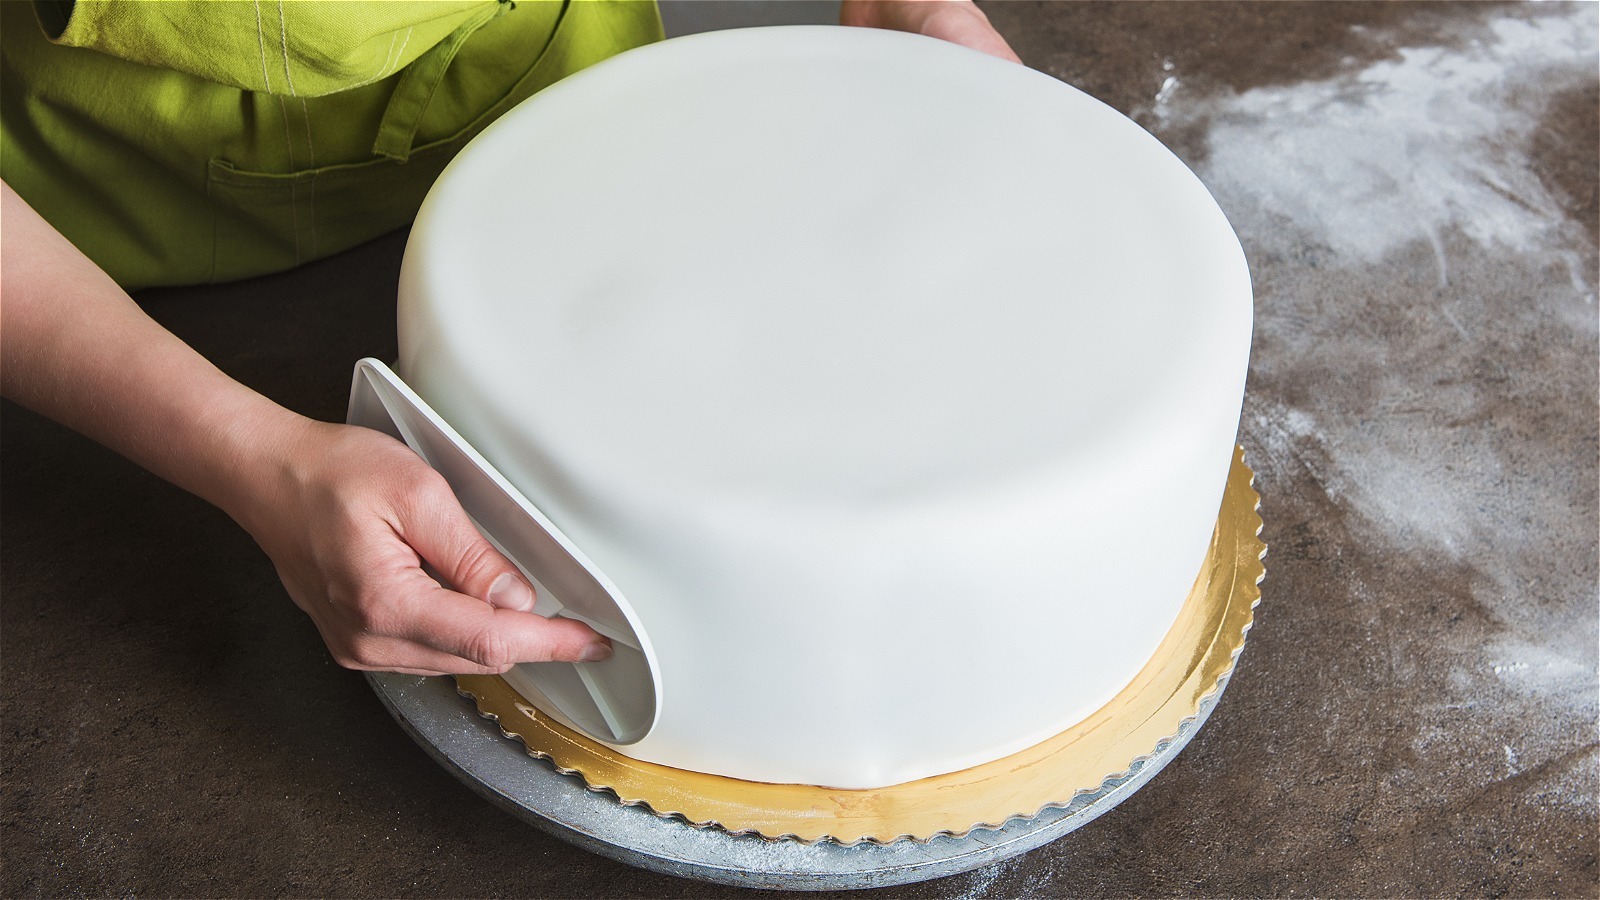 Cake Decorating with Fondant Icing or Gum Paste? | Hot Stuff Bakeware